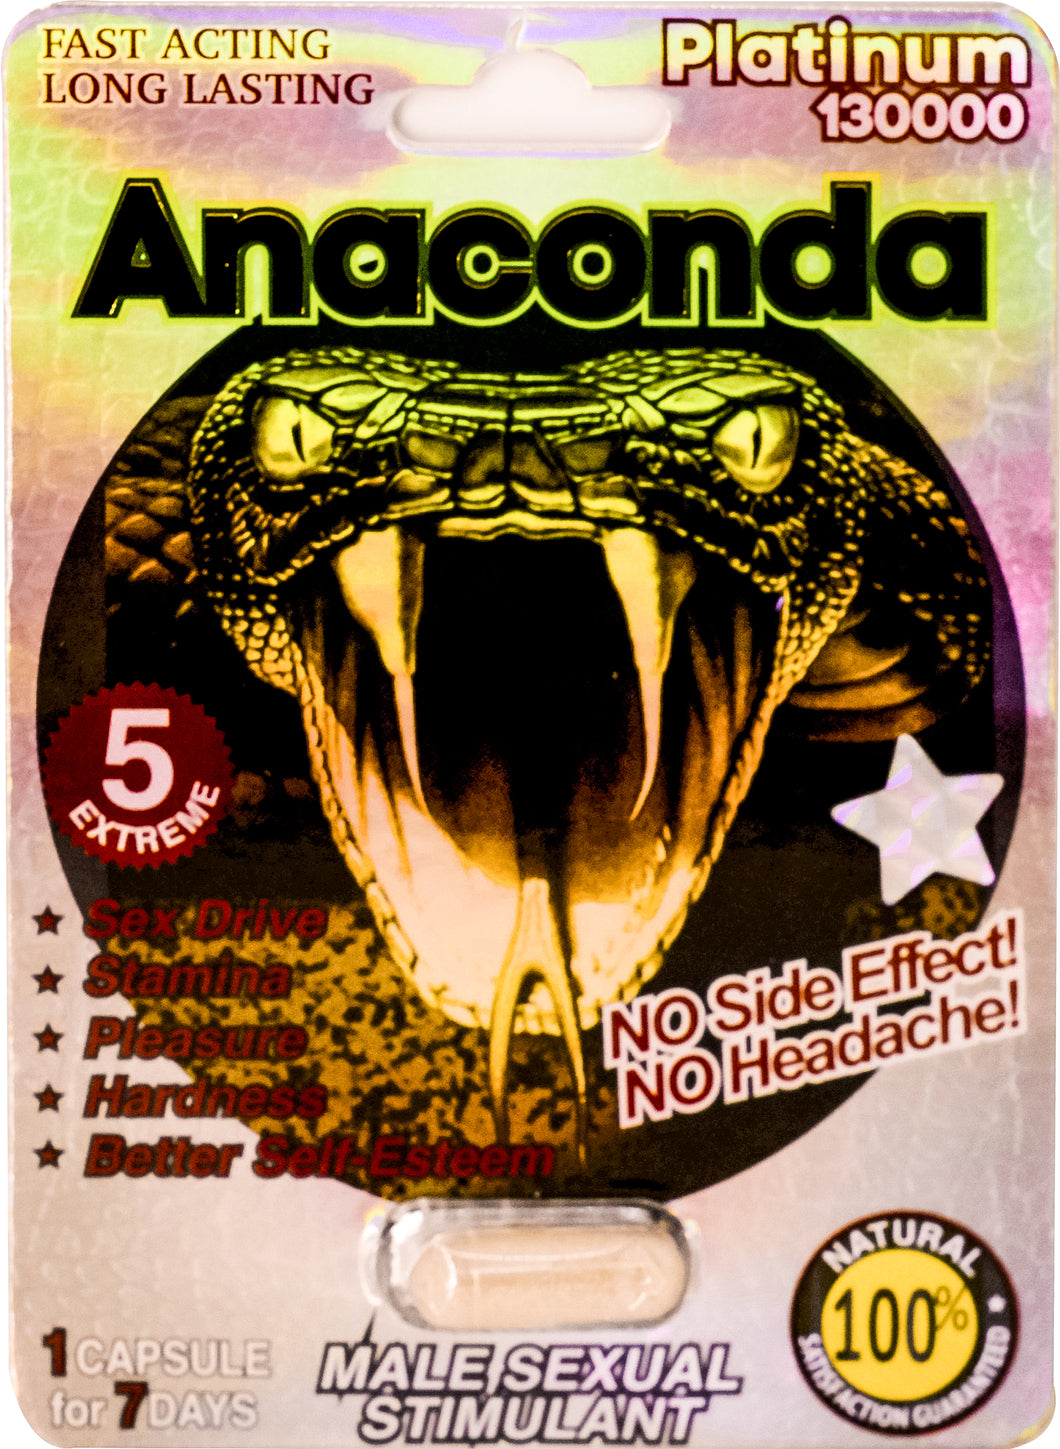 Anacnda Gold 130000 / Fast Acting Amplifier for Strength, Performance, Energy, and Endurance, Extra Strength